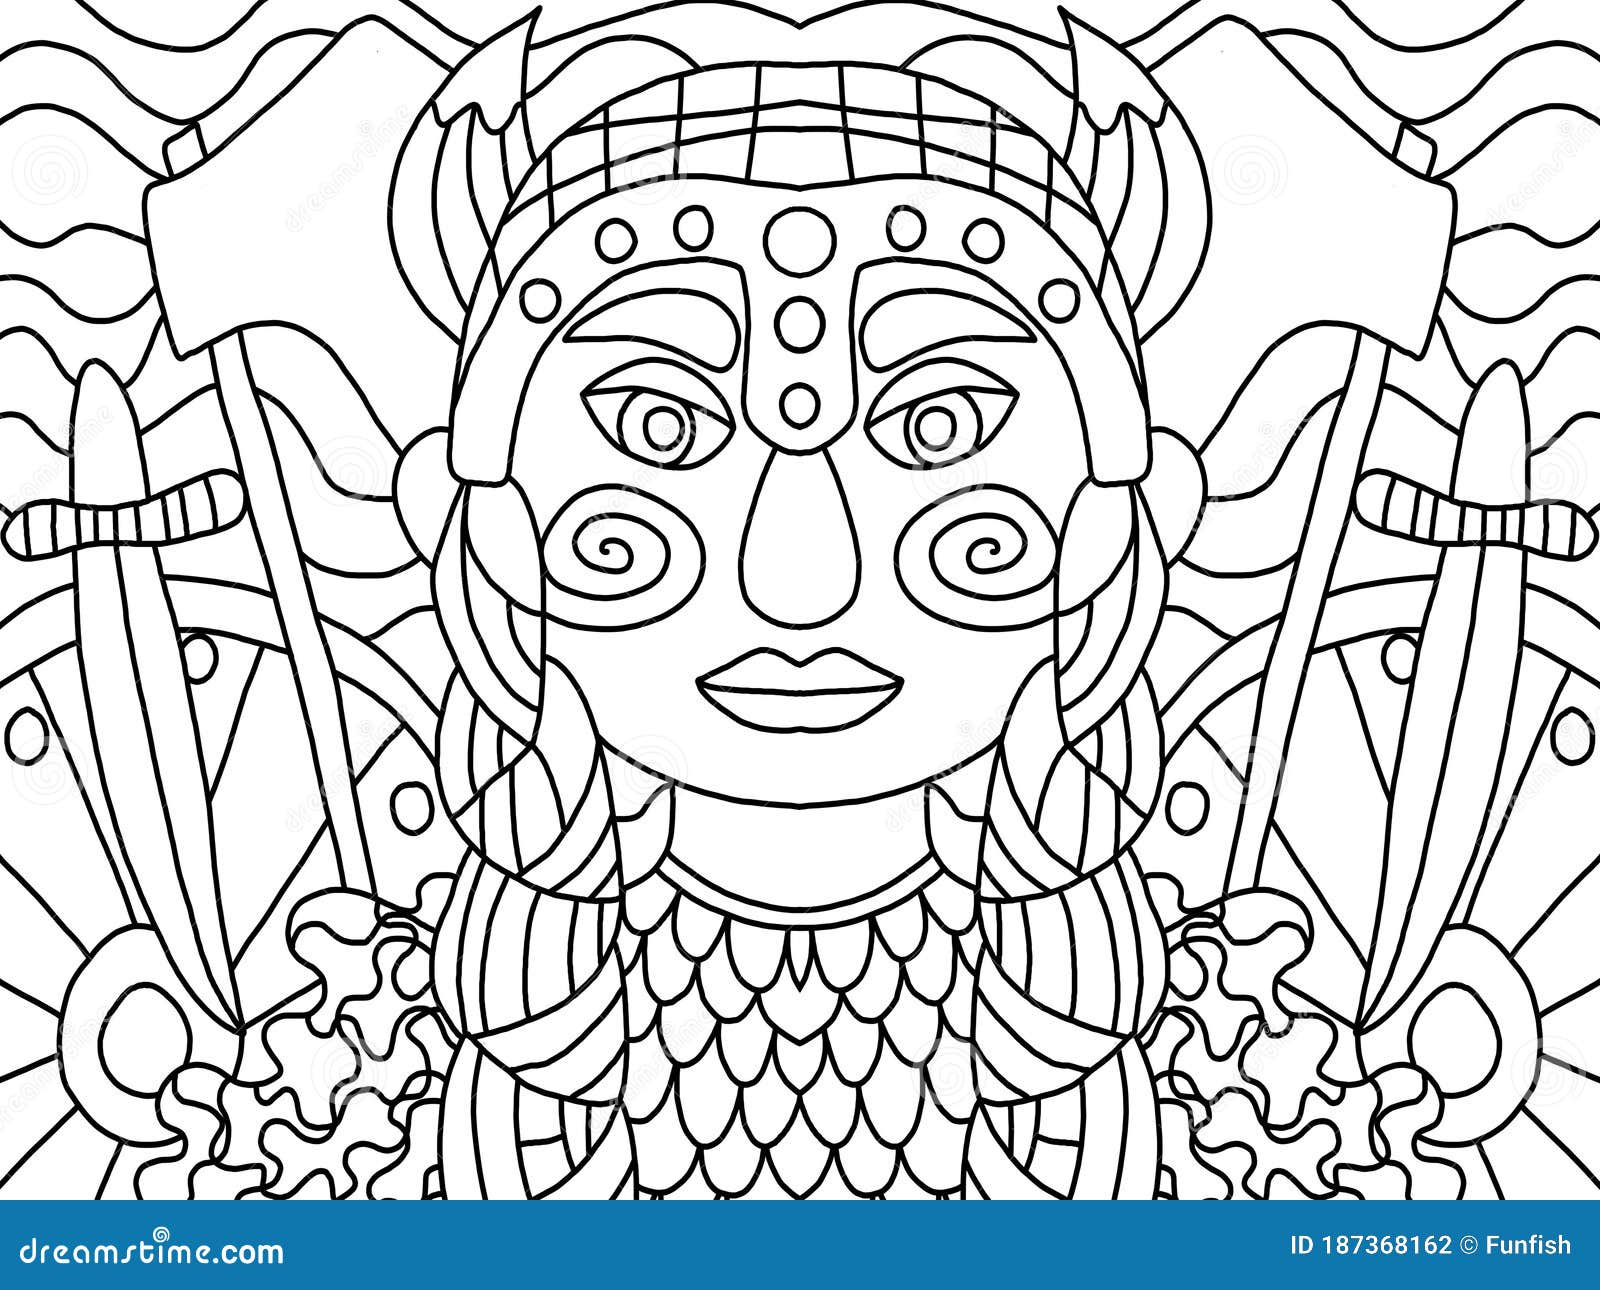 Woman viking warrior in armor coloring page for kids and adults stock illustration